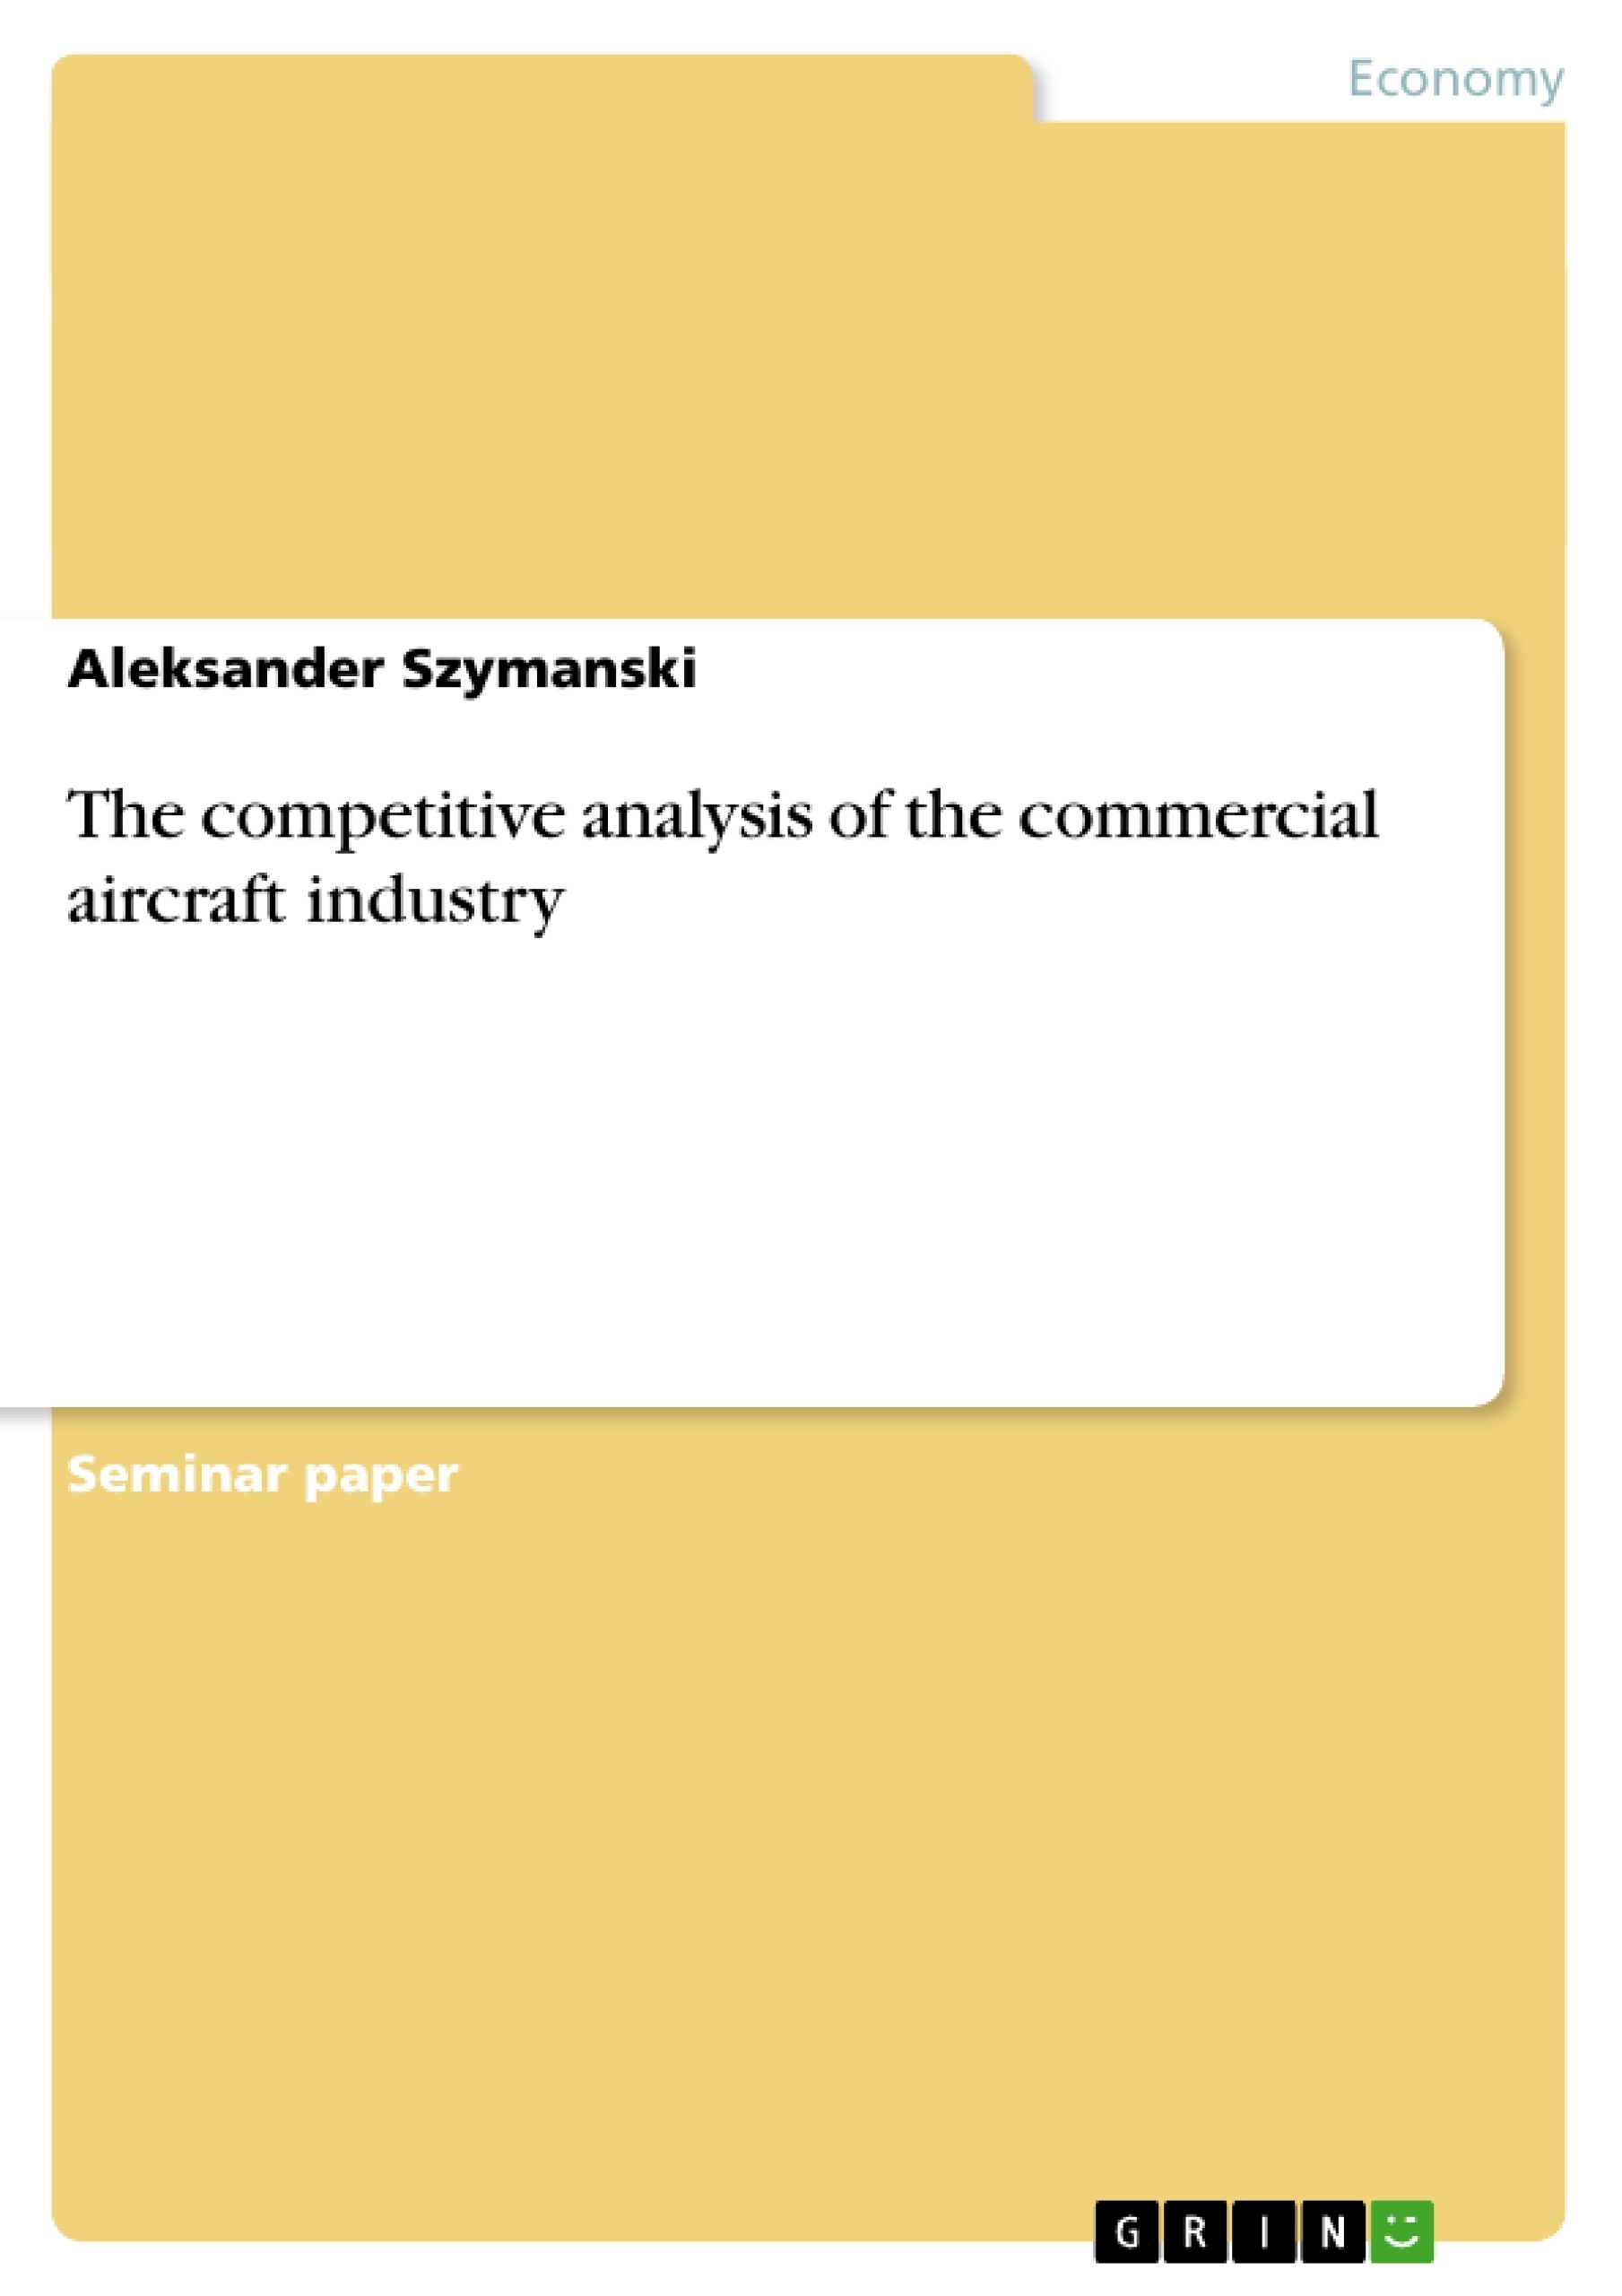 Title: The competitive analysis of the commercial aircraft industry